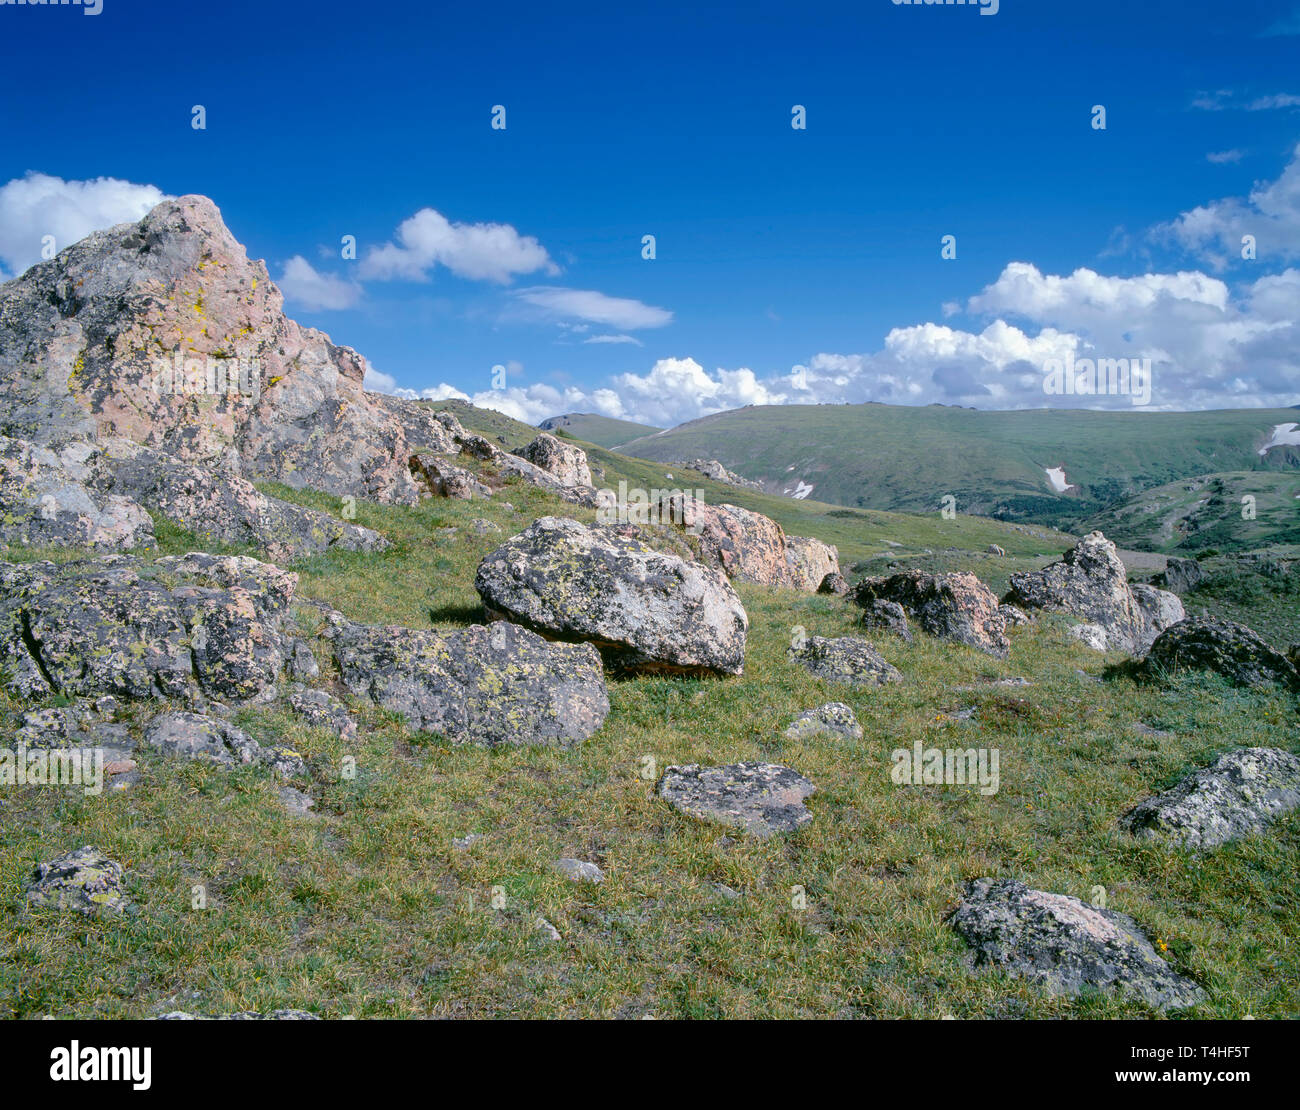 USA, Colorado, Rocky Mountain National Park, Alpine tundra and lichen covered rocks along upper portion of Old Fall River Road. Stock Photo